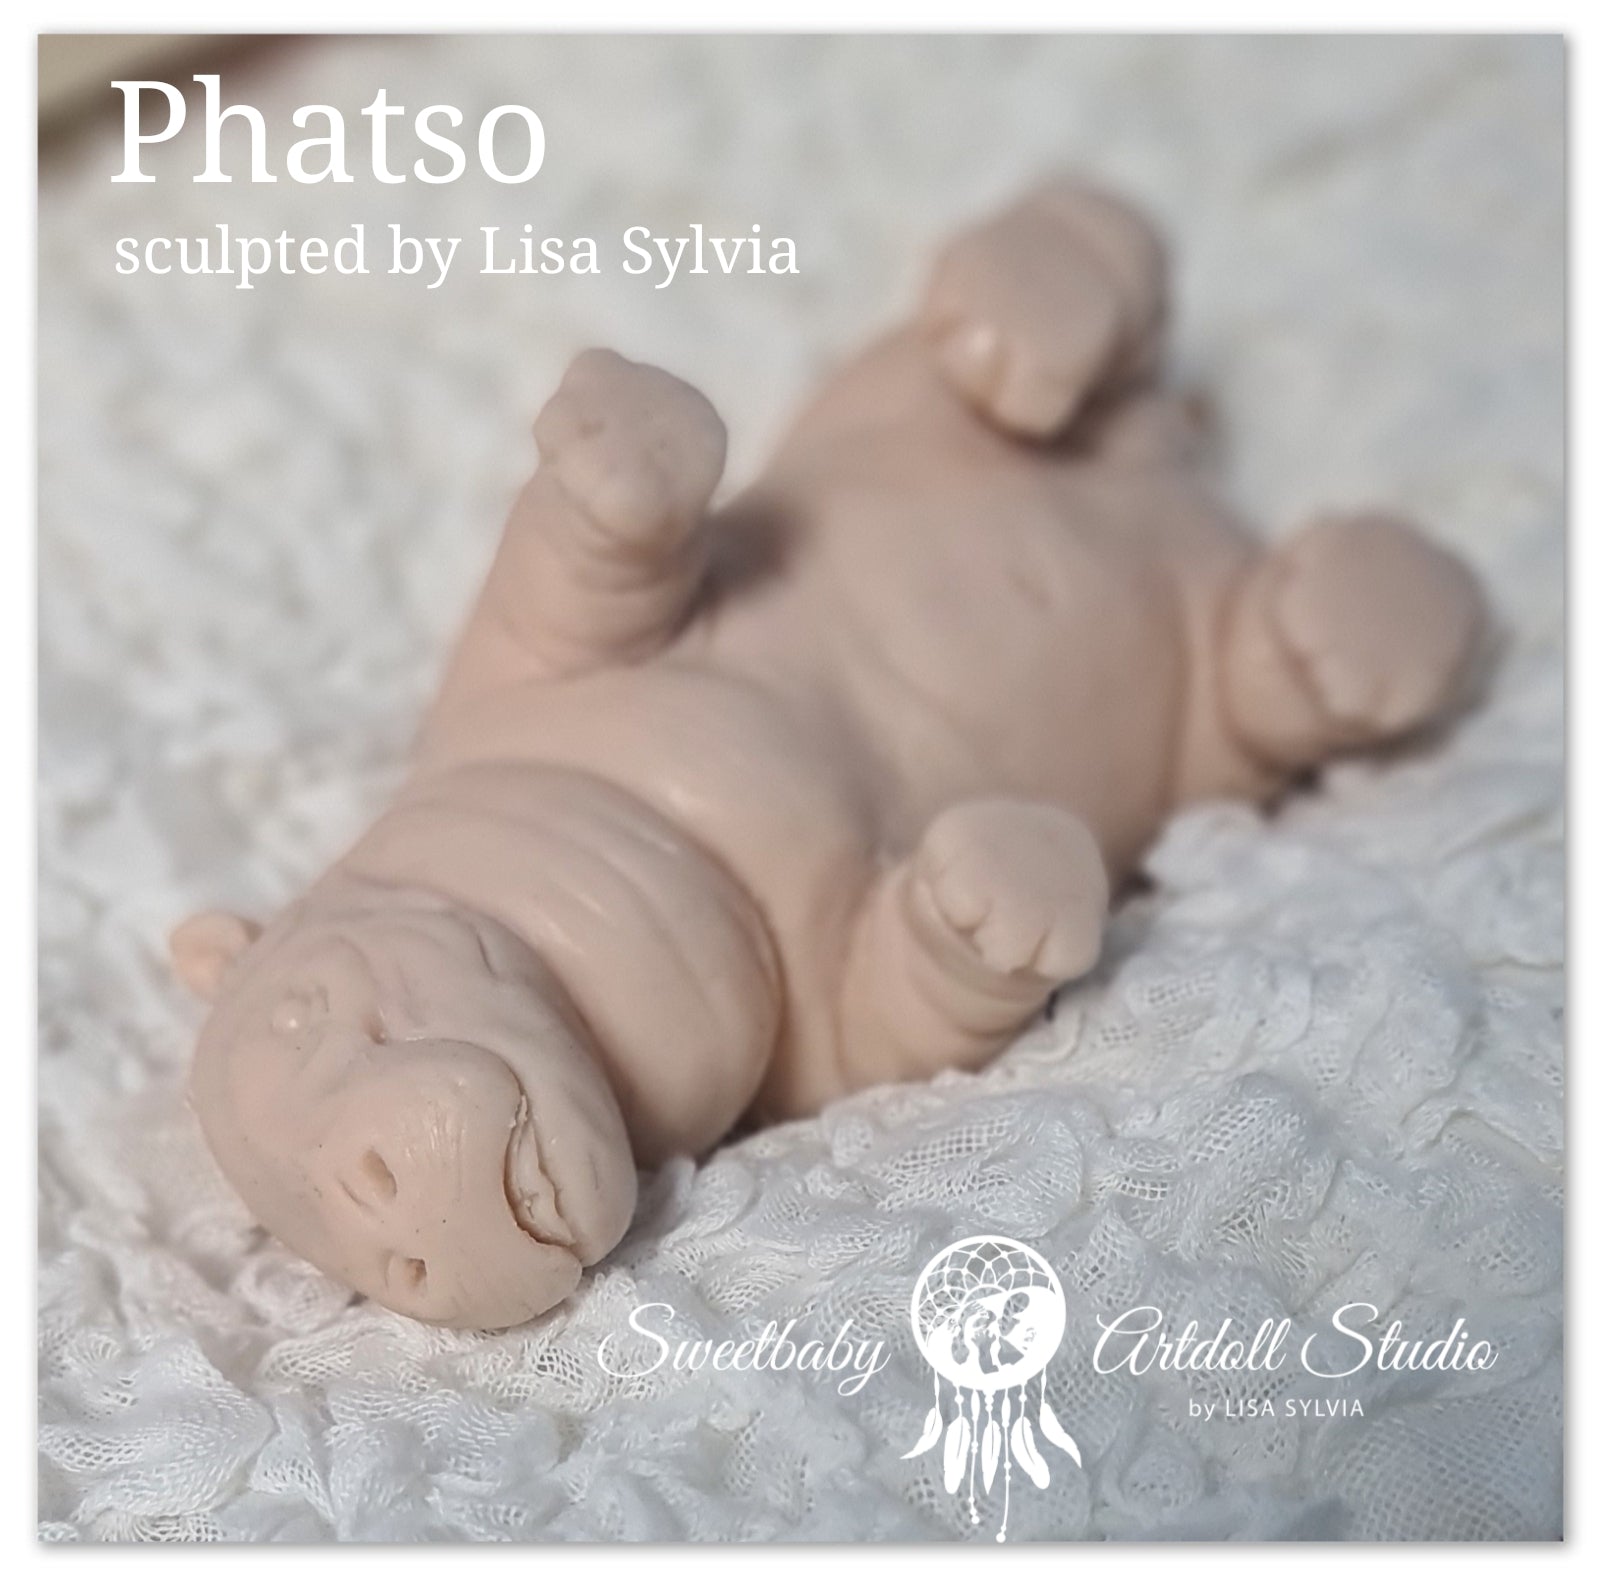 Phatso Silicone Baby Hippo Un-Painted Kit Sculpted by Lisa Sylvia